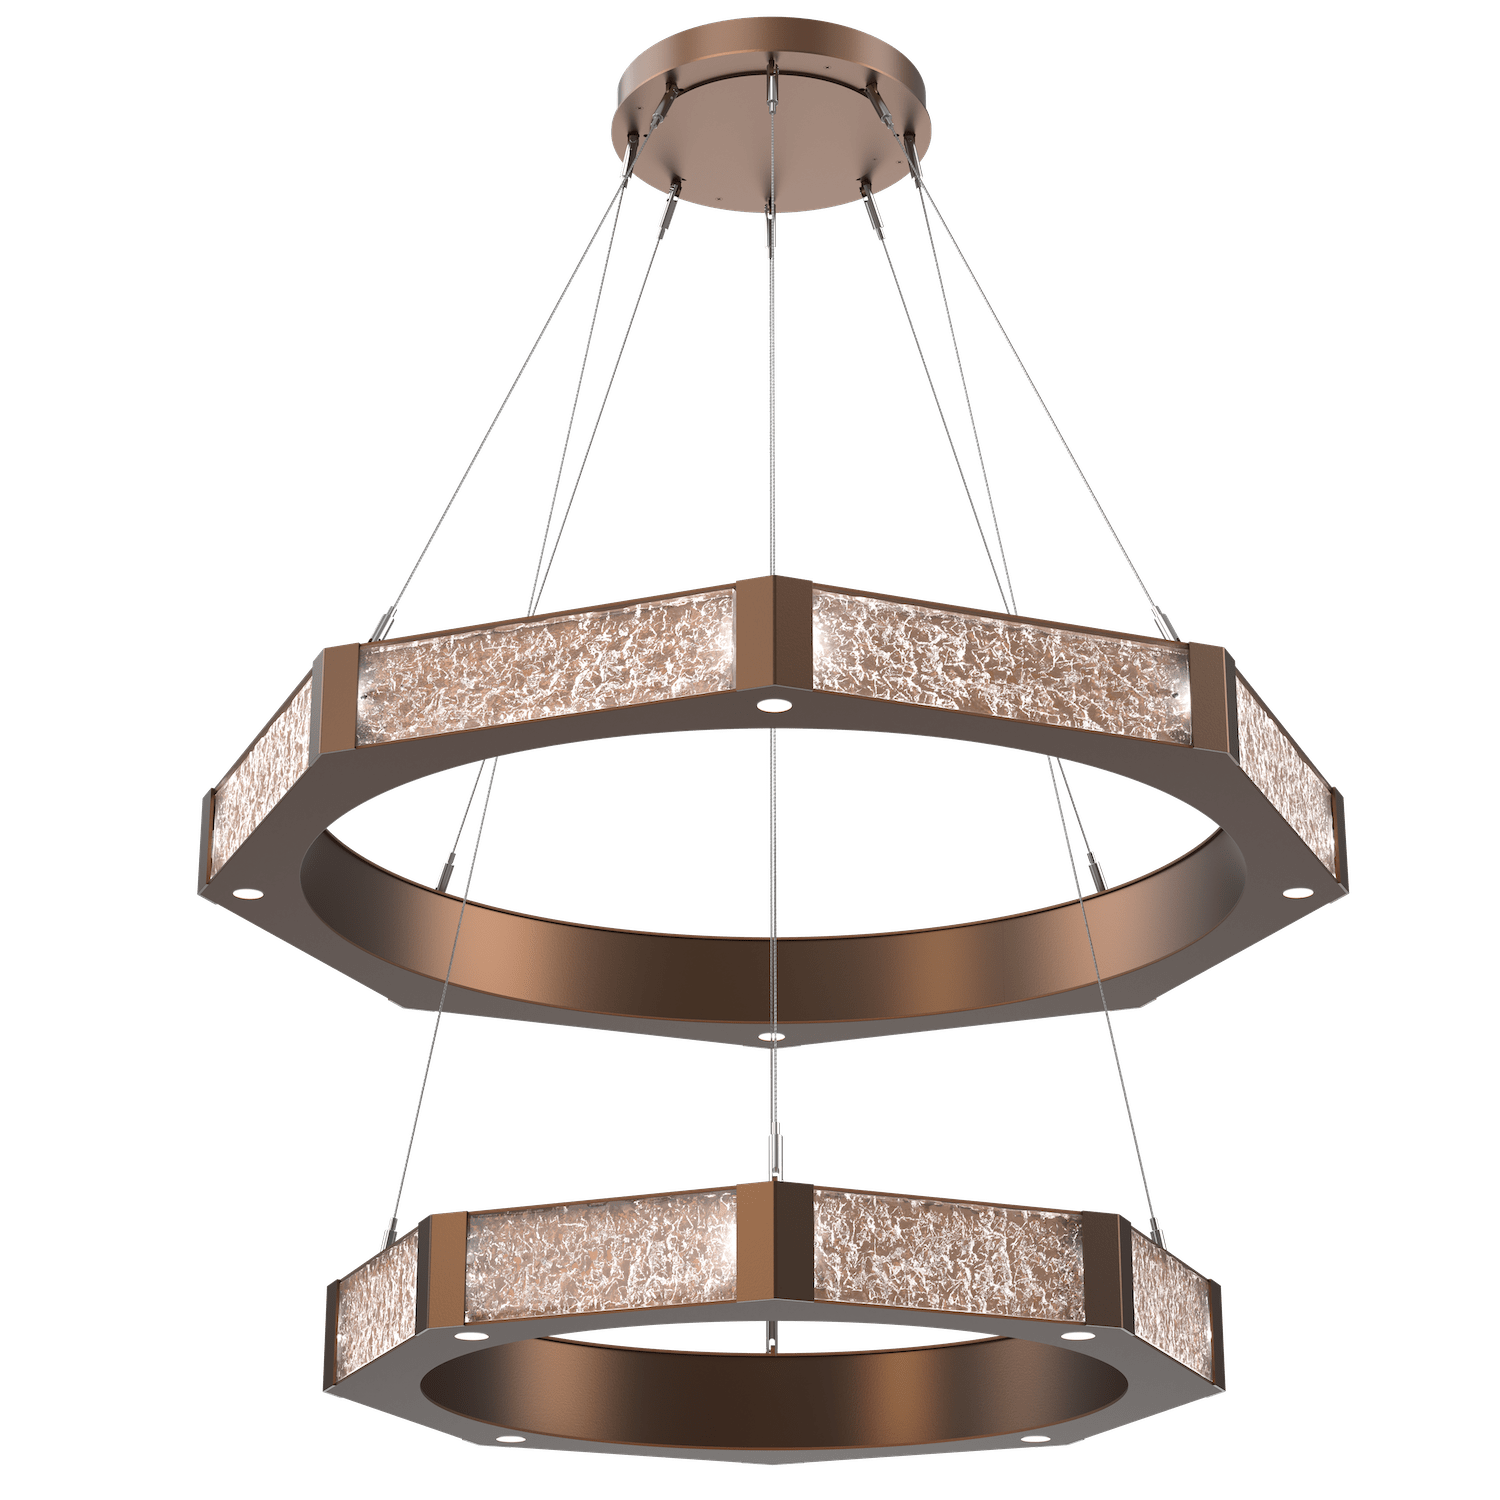 CHB0061-2B-BB-GC-Hammerton-Studio-Glacier-48-inch-two-tier-ring-chandelier-with-burnished-bronze-finish-and-clear-blown-glass-with-geo-clear-cast-glass-diffusers-and-LED-lamping